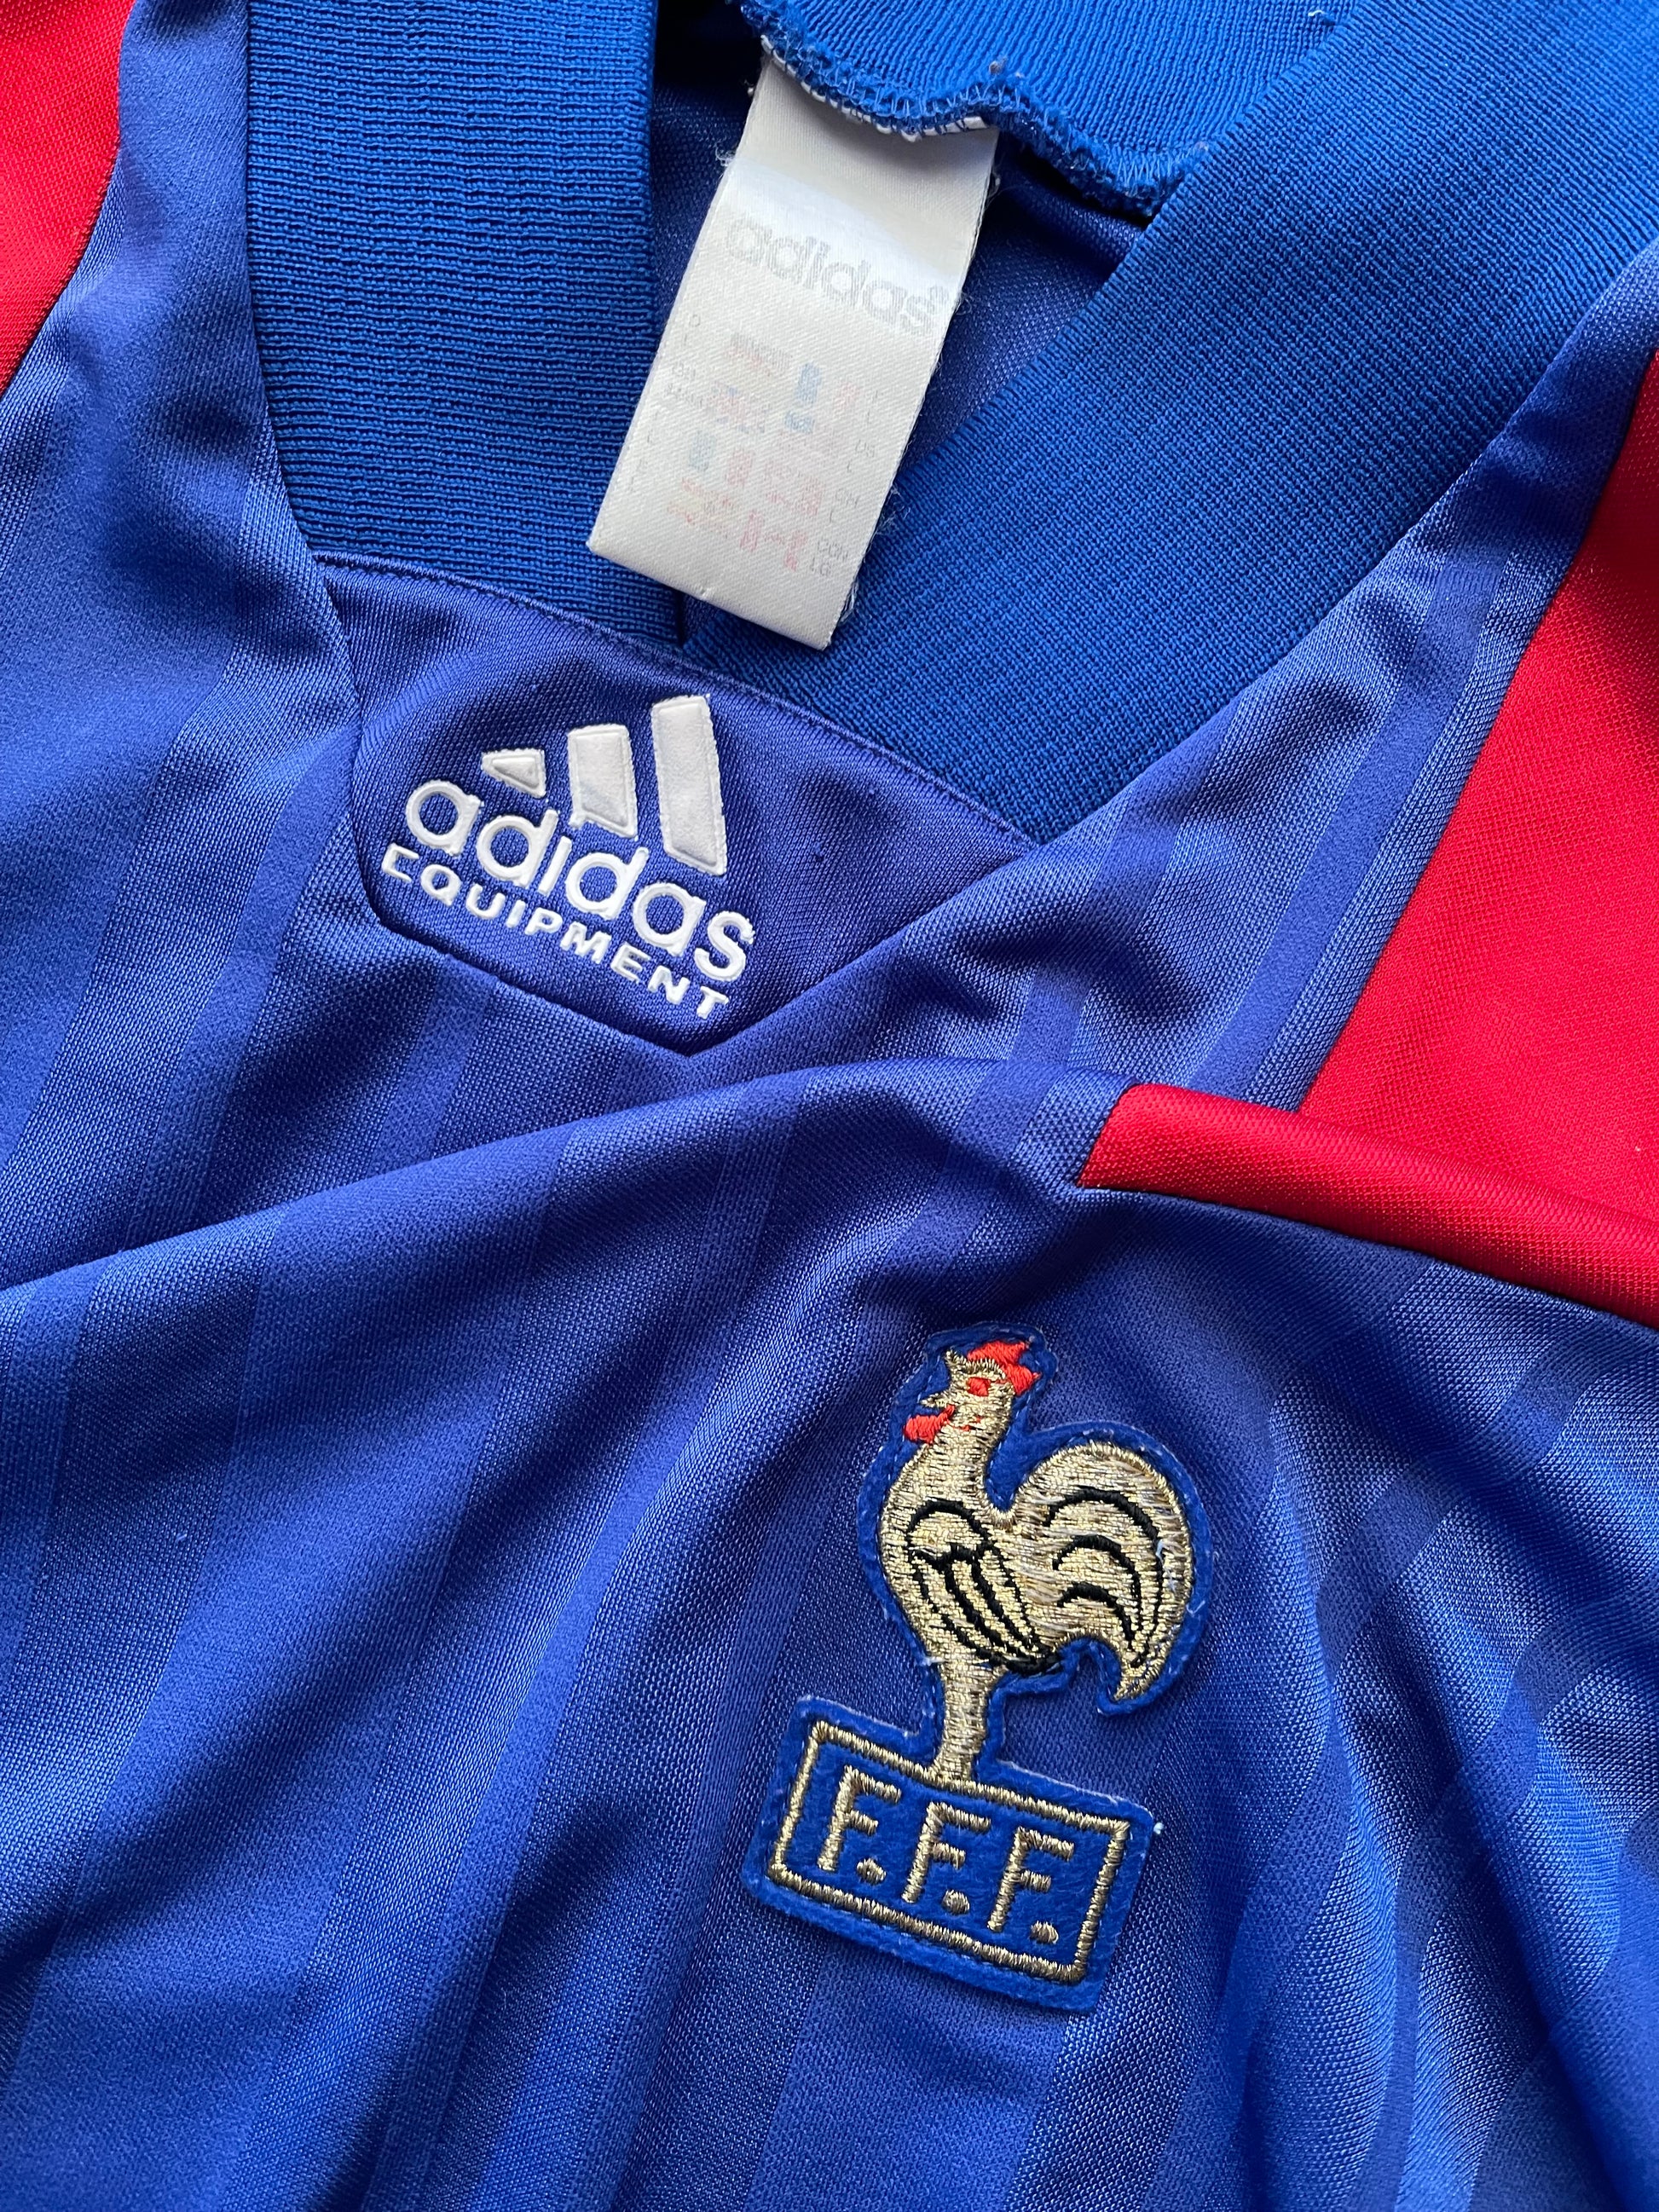 Vintage France Adidas Equipment 1992-1993 Home Football Shirt Size L Blue Red White